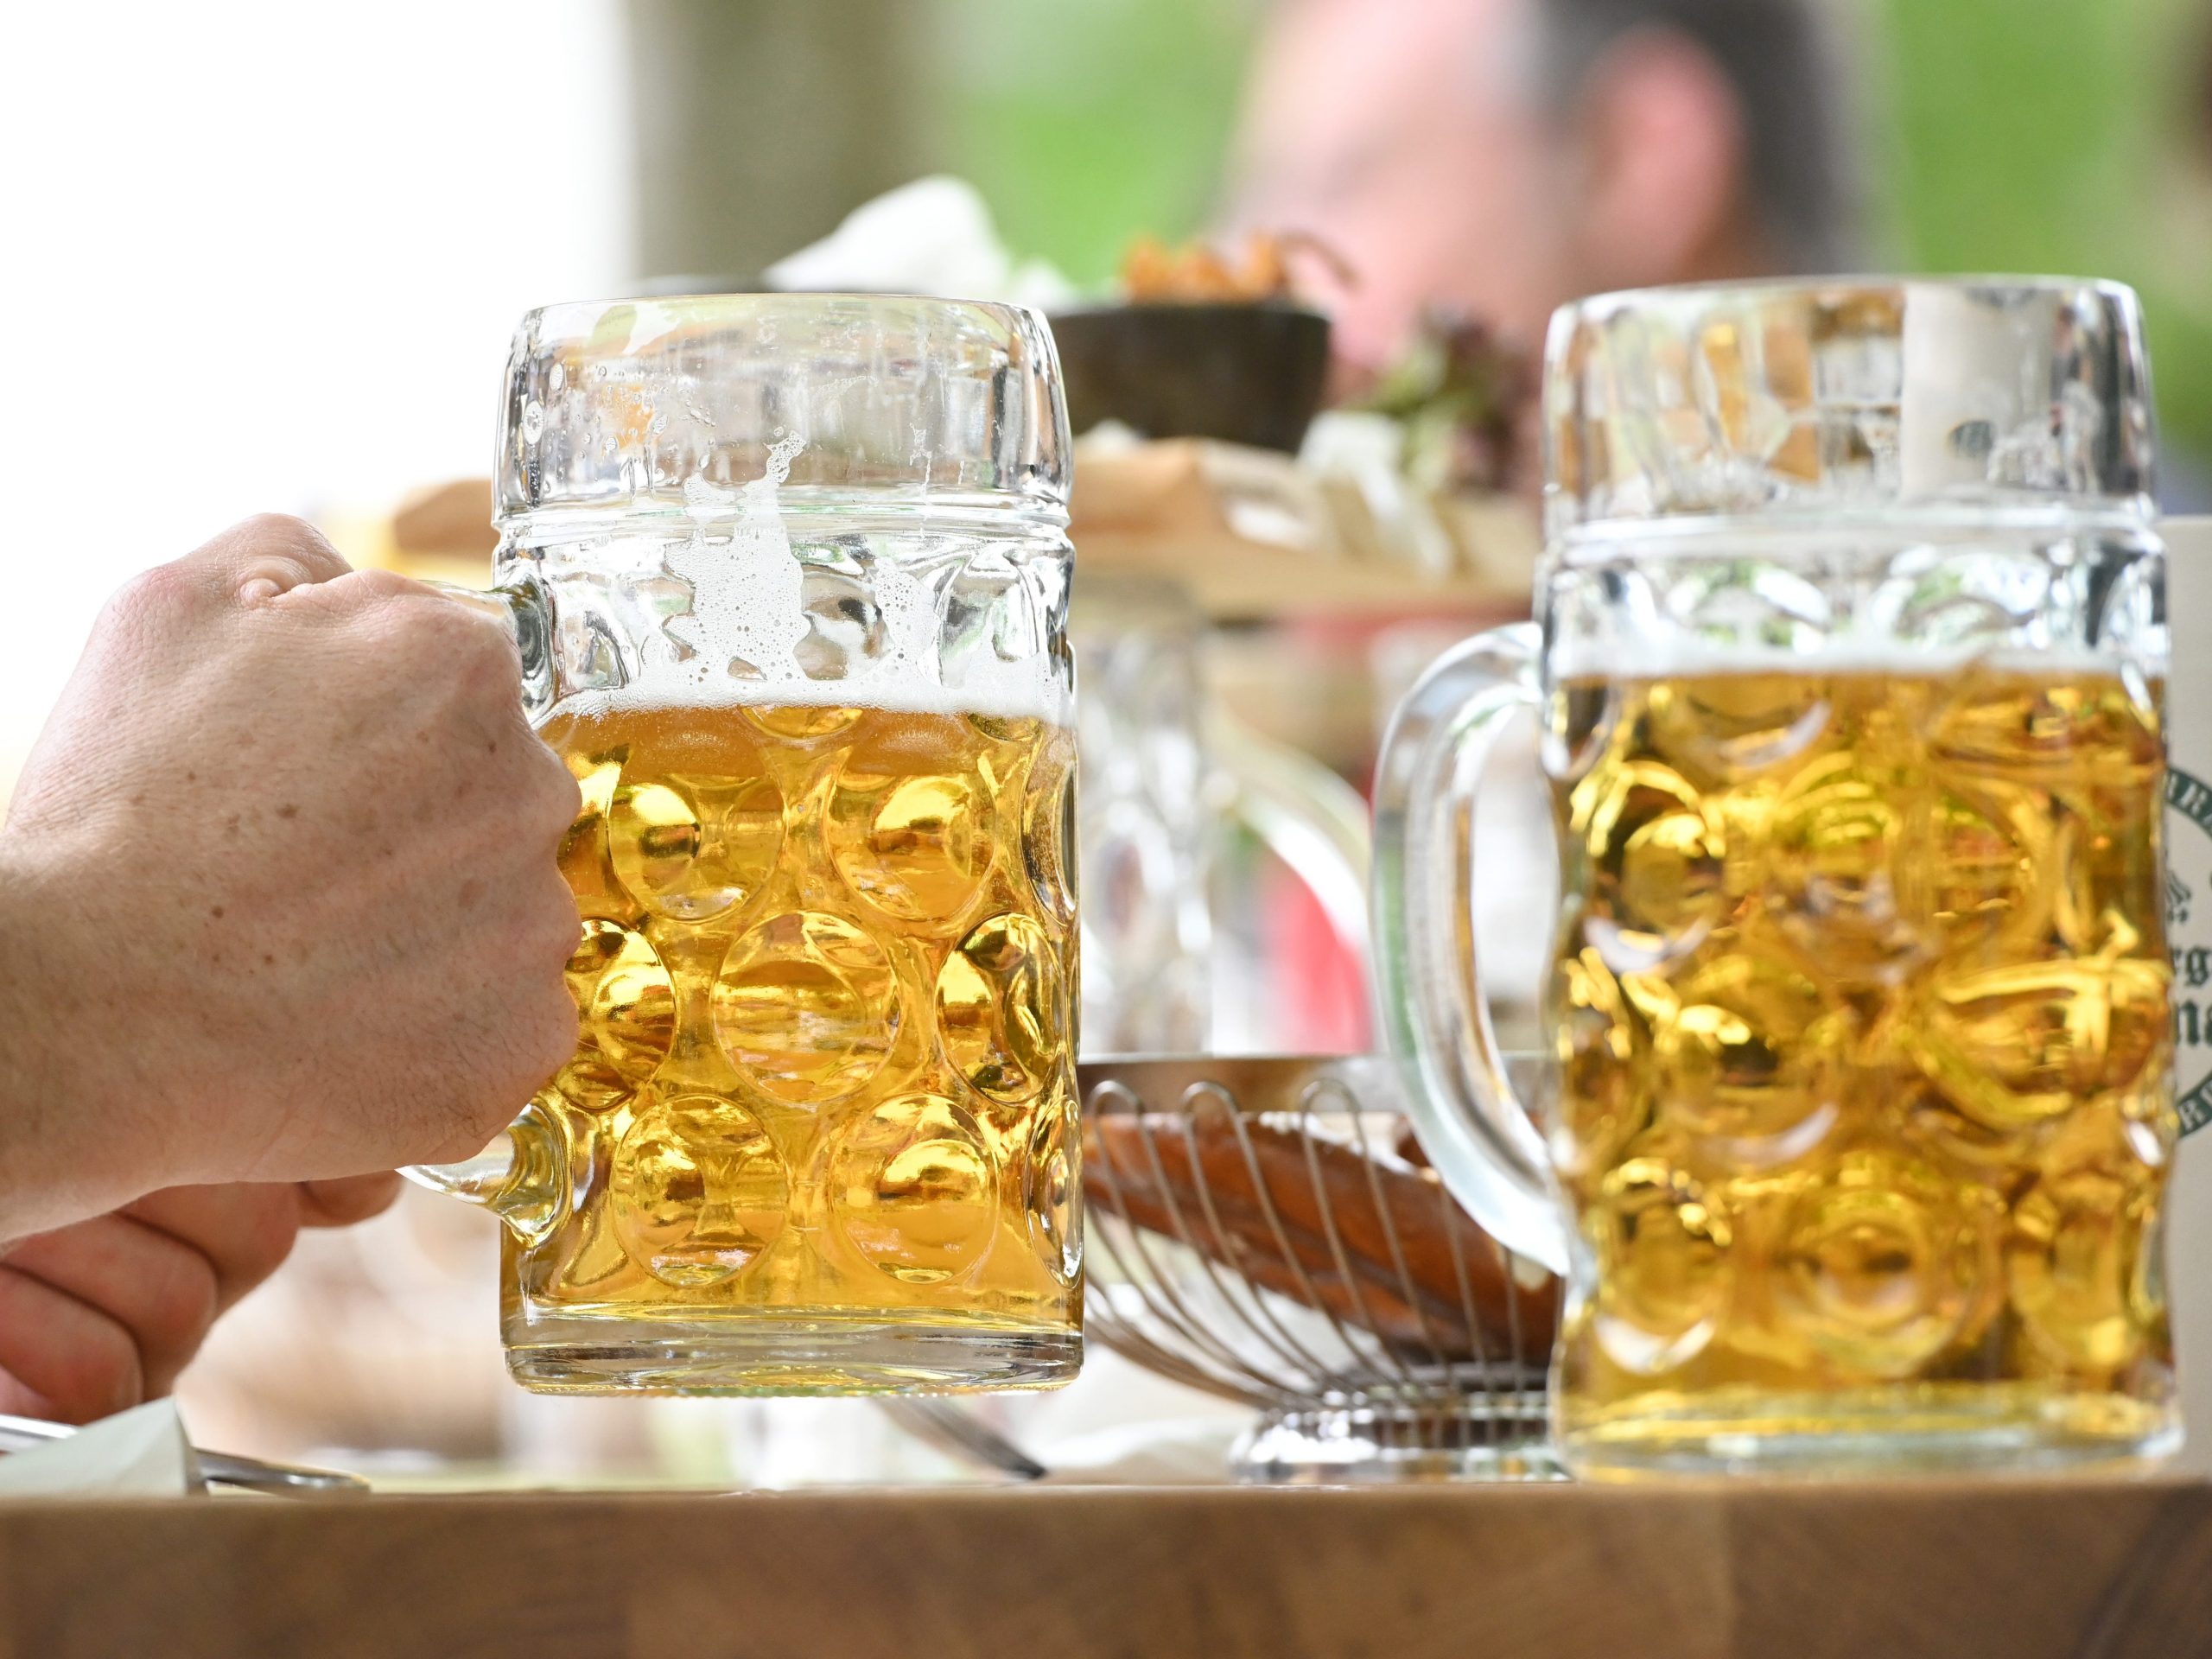 A guest reaches for a beer mug in the beer garden at the "Gasthof zur Brücke"